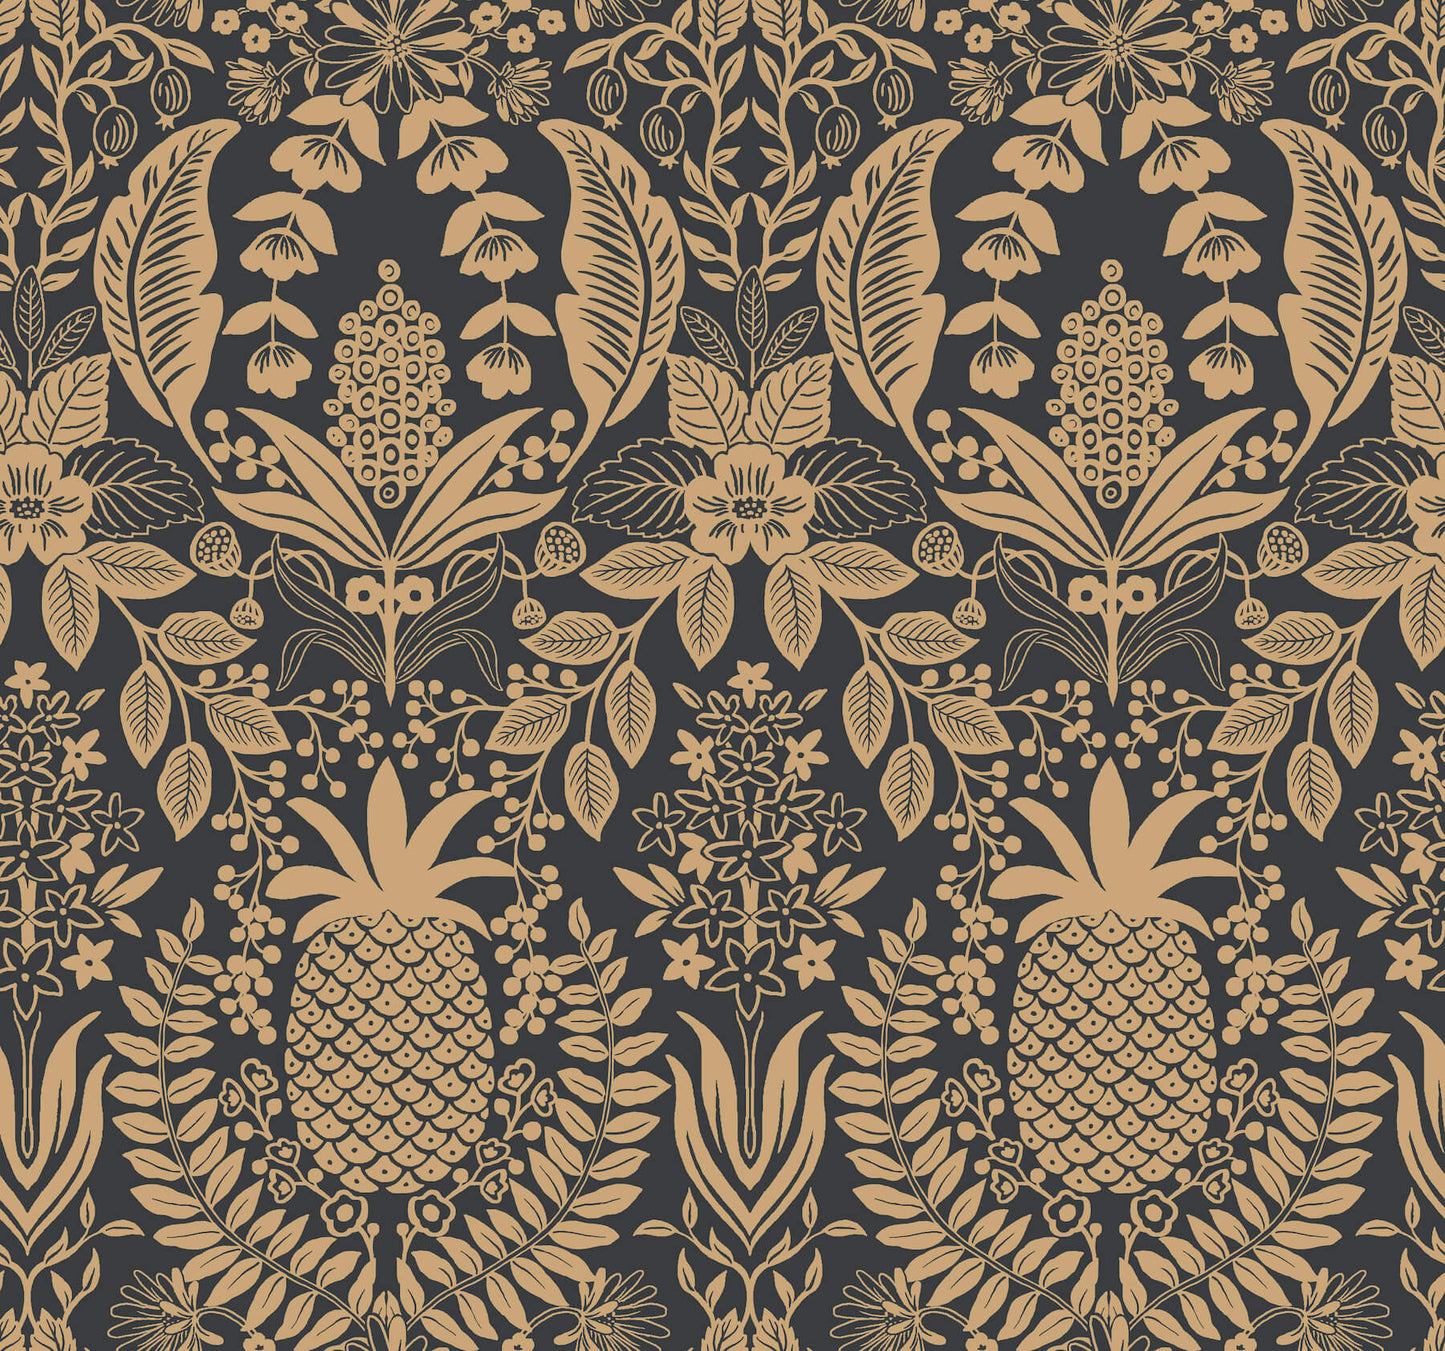 Rifle Paper Co. 3rd Edition Pineapple Damask Wallpaper - Black